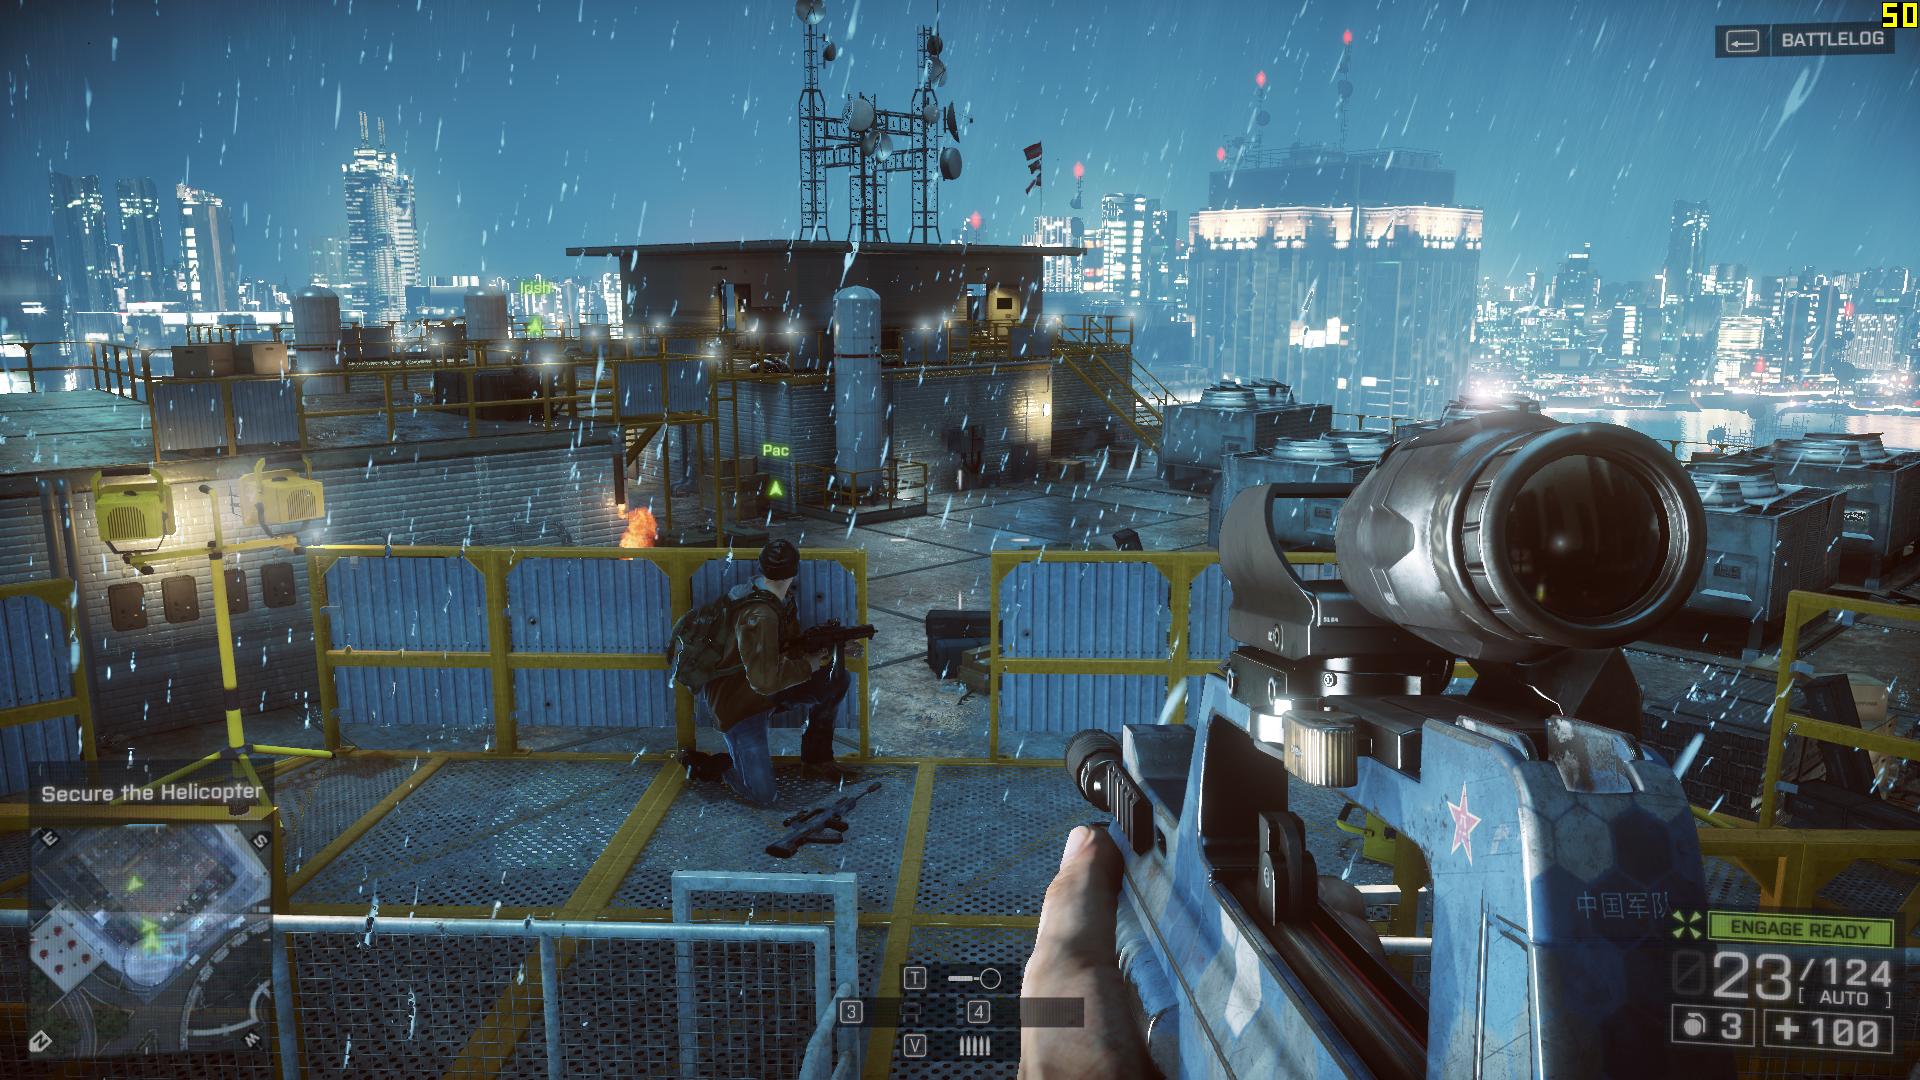 Battlefield 4 - Gameplay #4 (PC) - High quality stream and